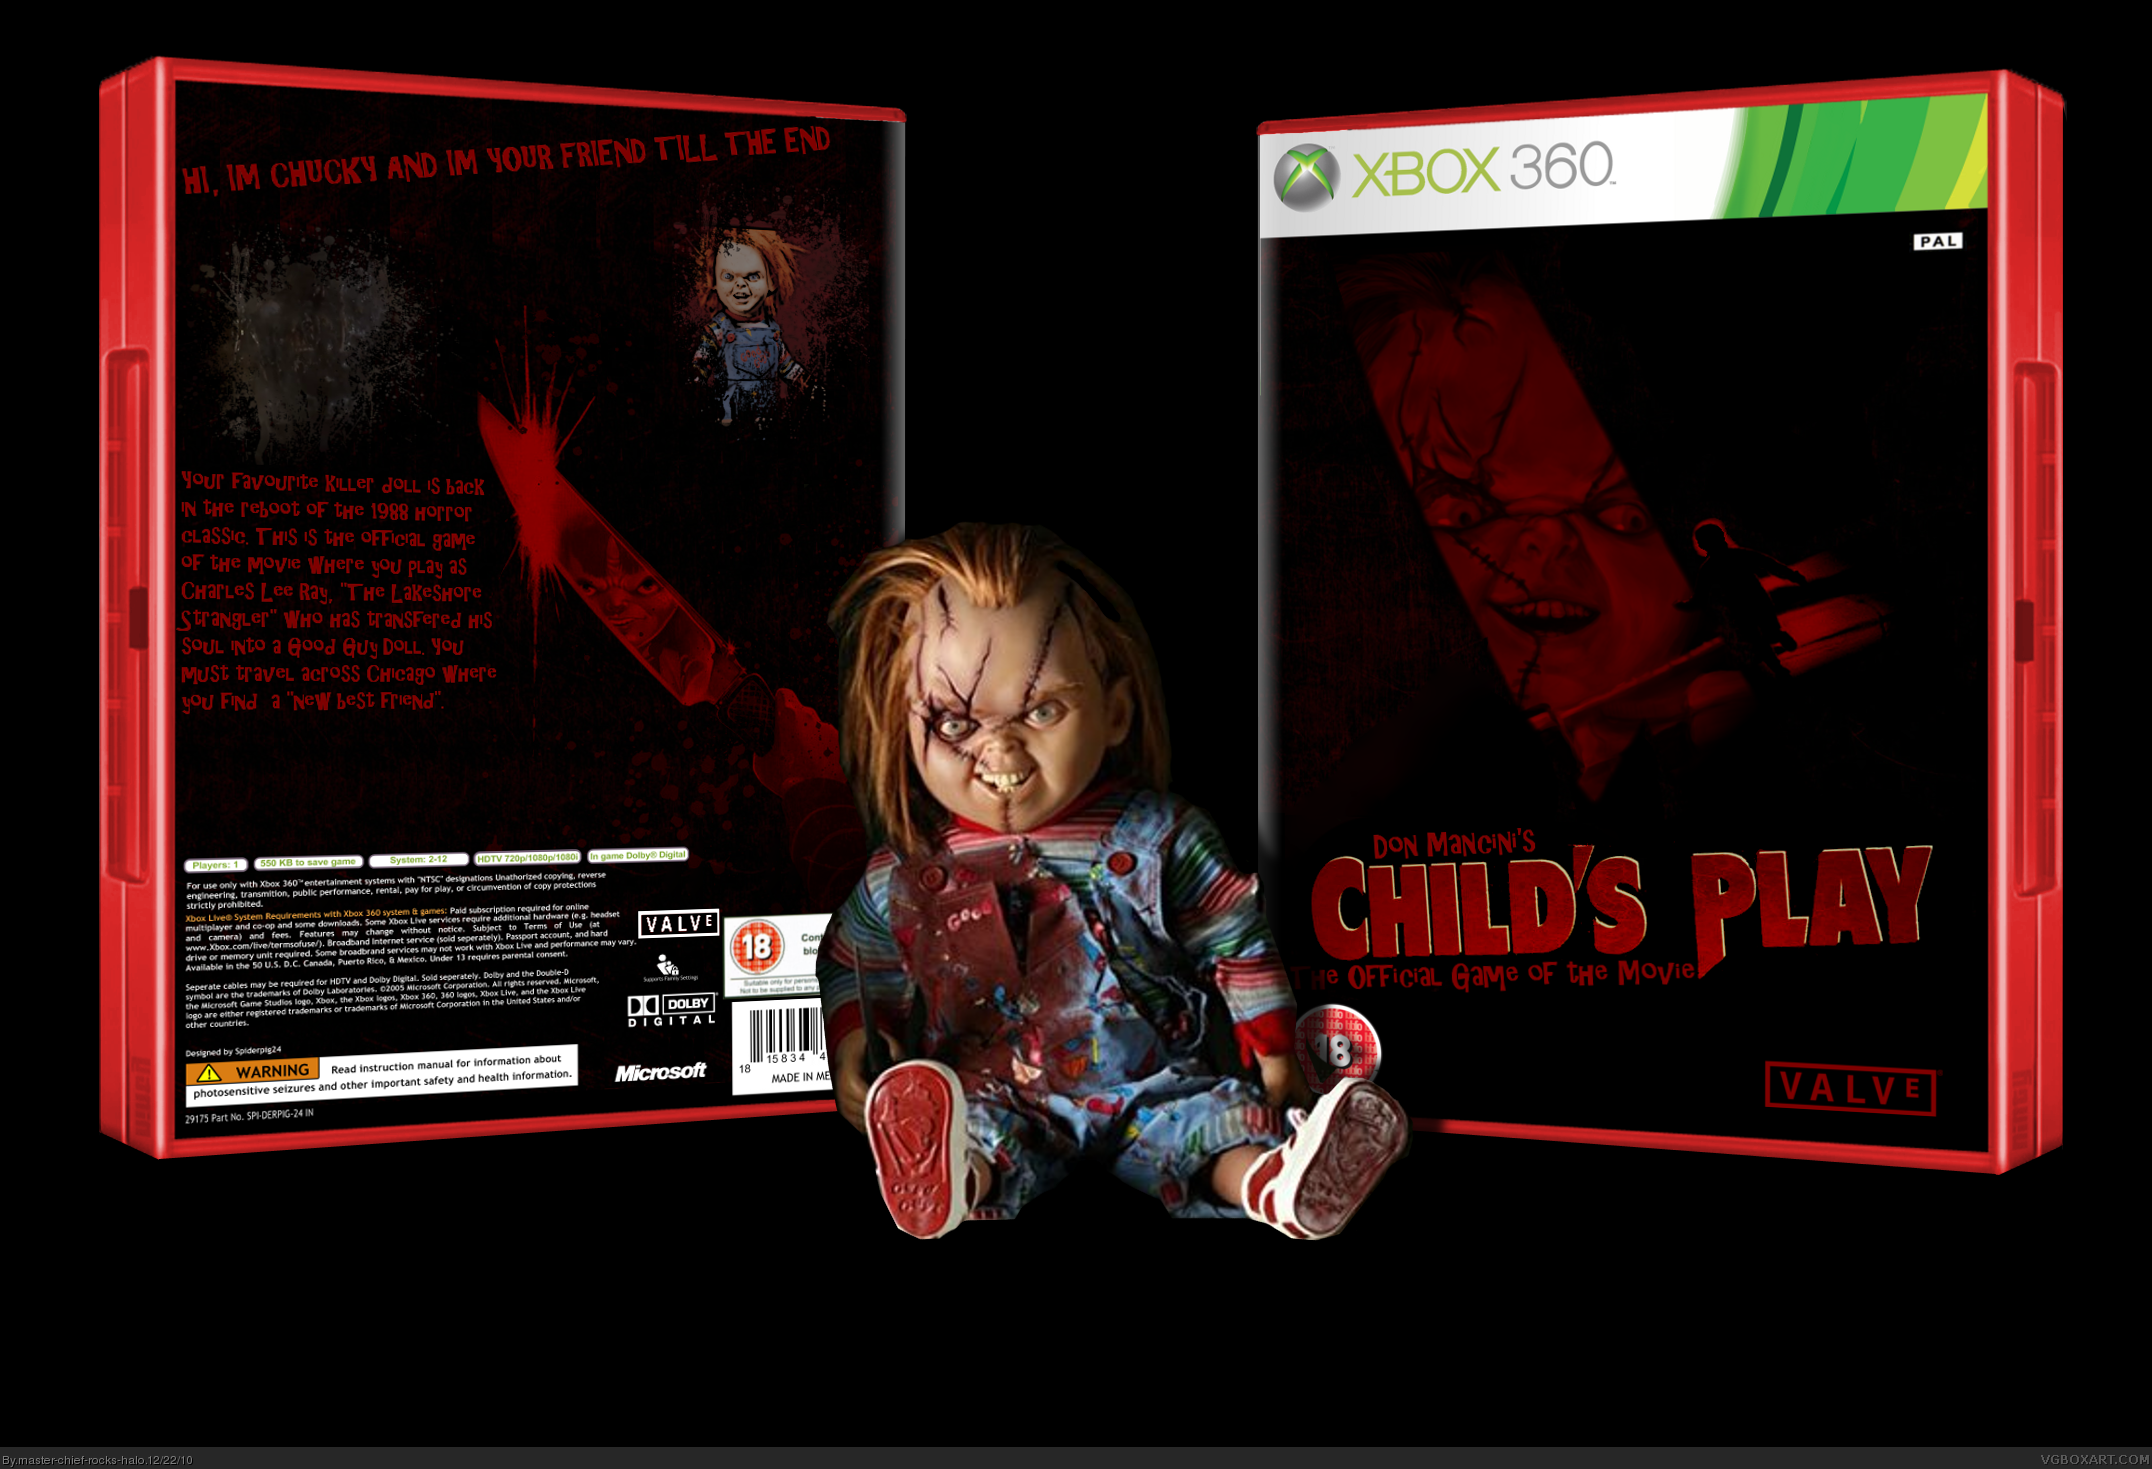 Don Mancini's Child's Play box cover